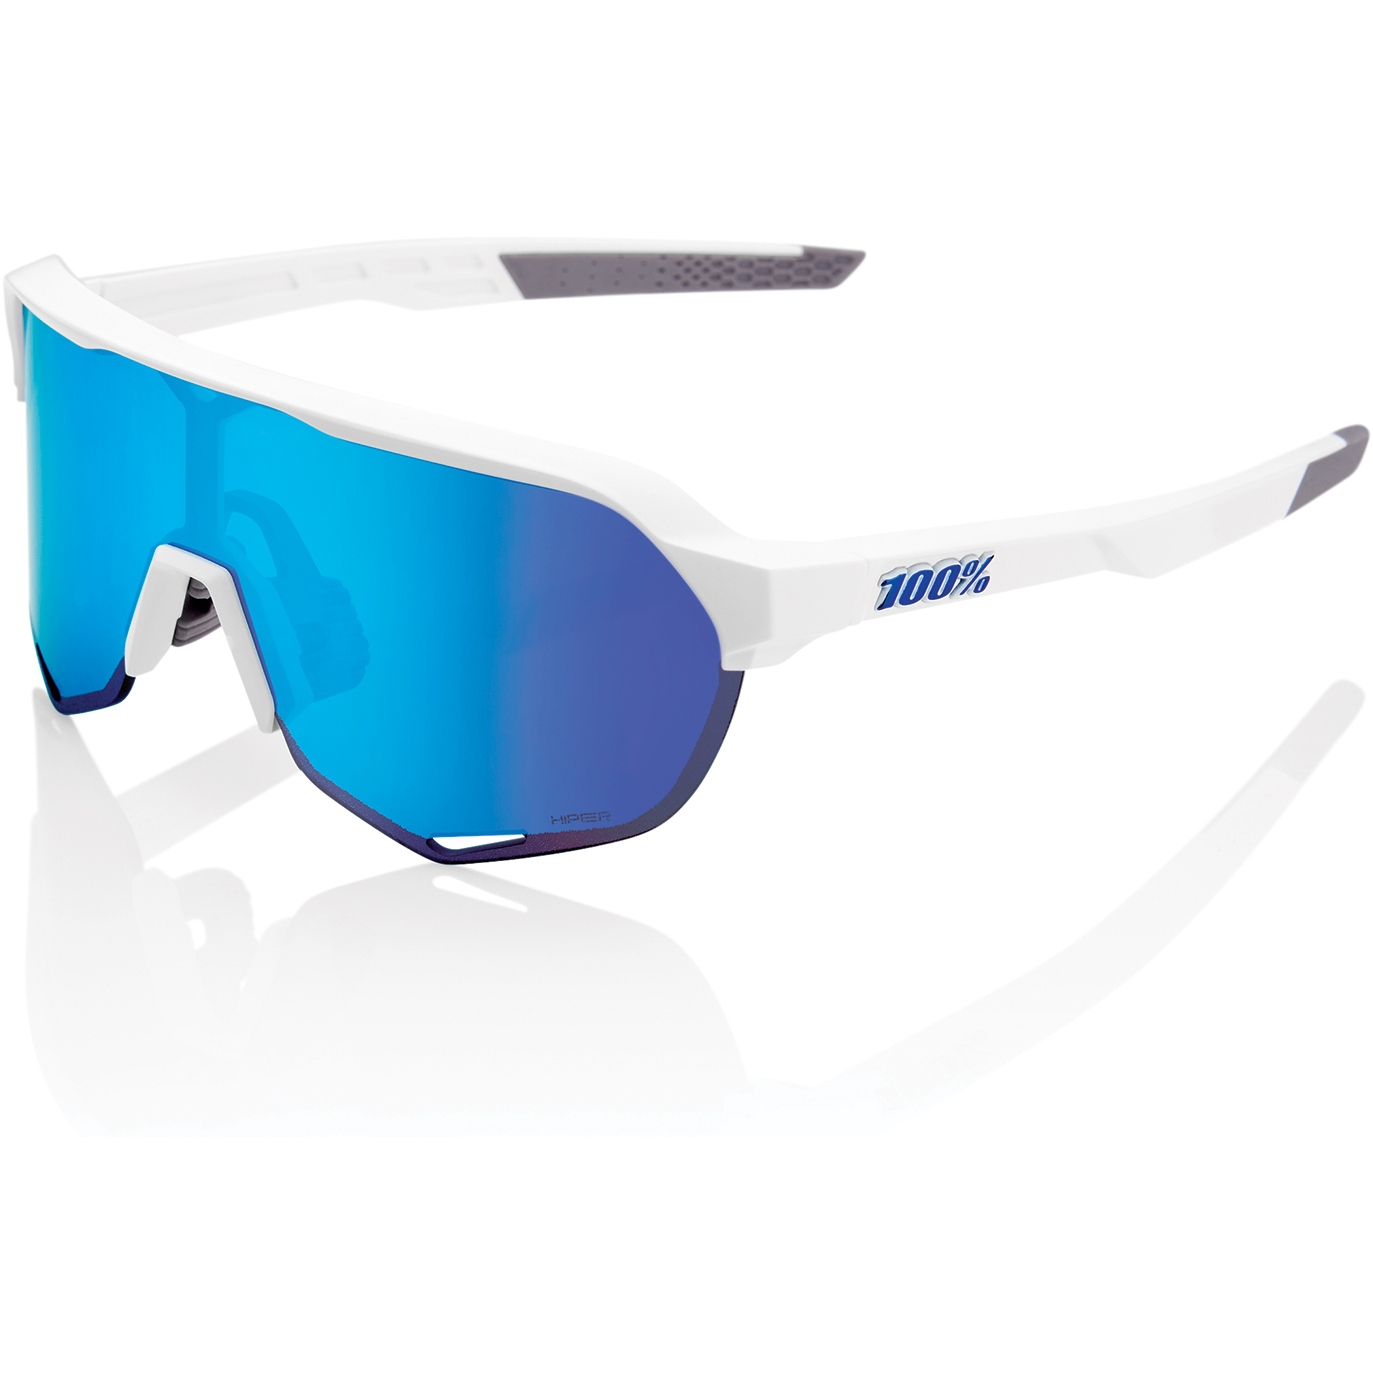 Picture of 100% S2 Glasses - HiPER Mirror Lens - Matte White / Blue Multilayer + Clear